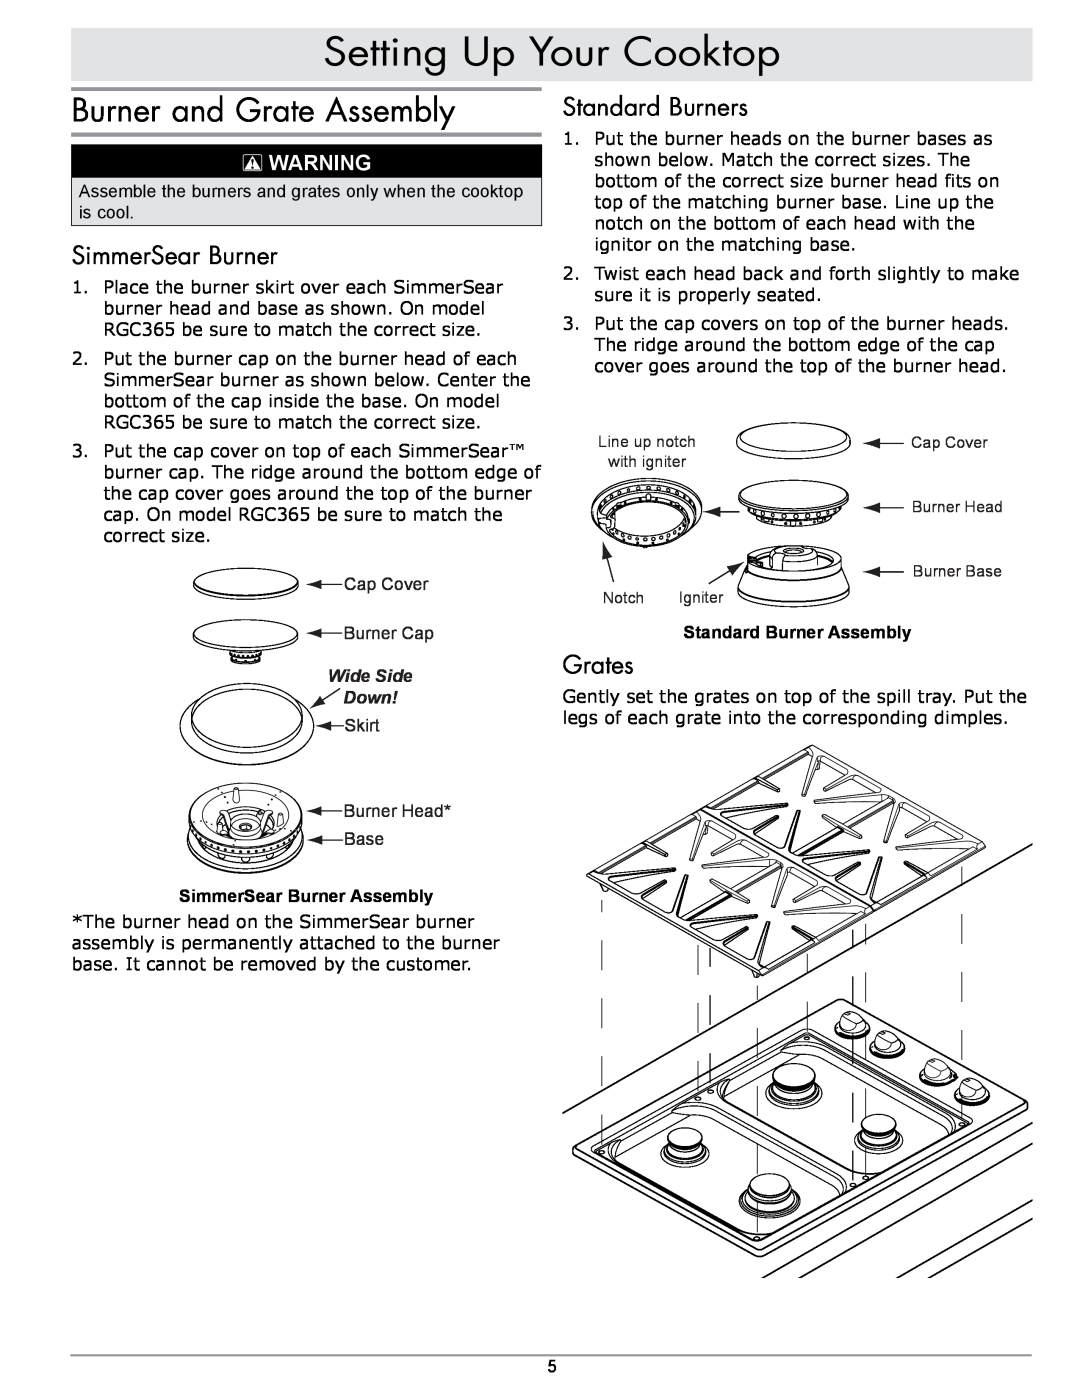 Dacor RGC304, RGC365 manual Setting Up Your Cooktop, Burner and Grate Assembly, SimmerSear Burner, Standard Burners, Grates 